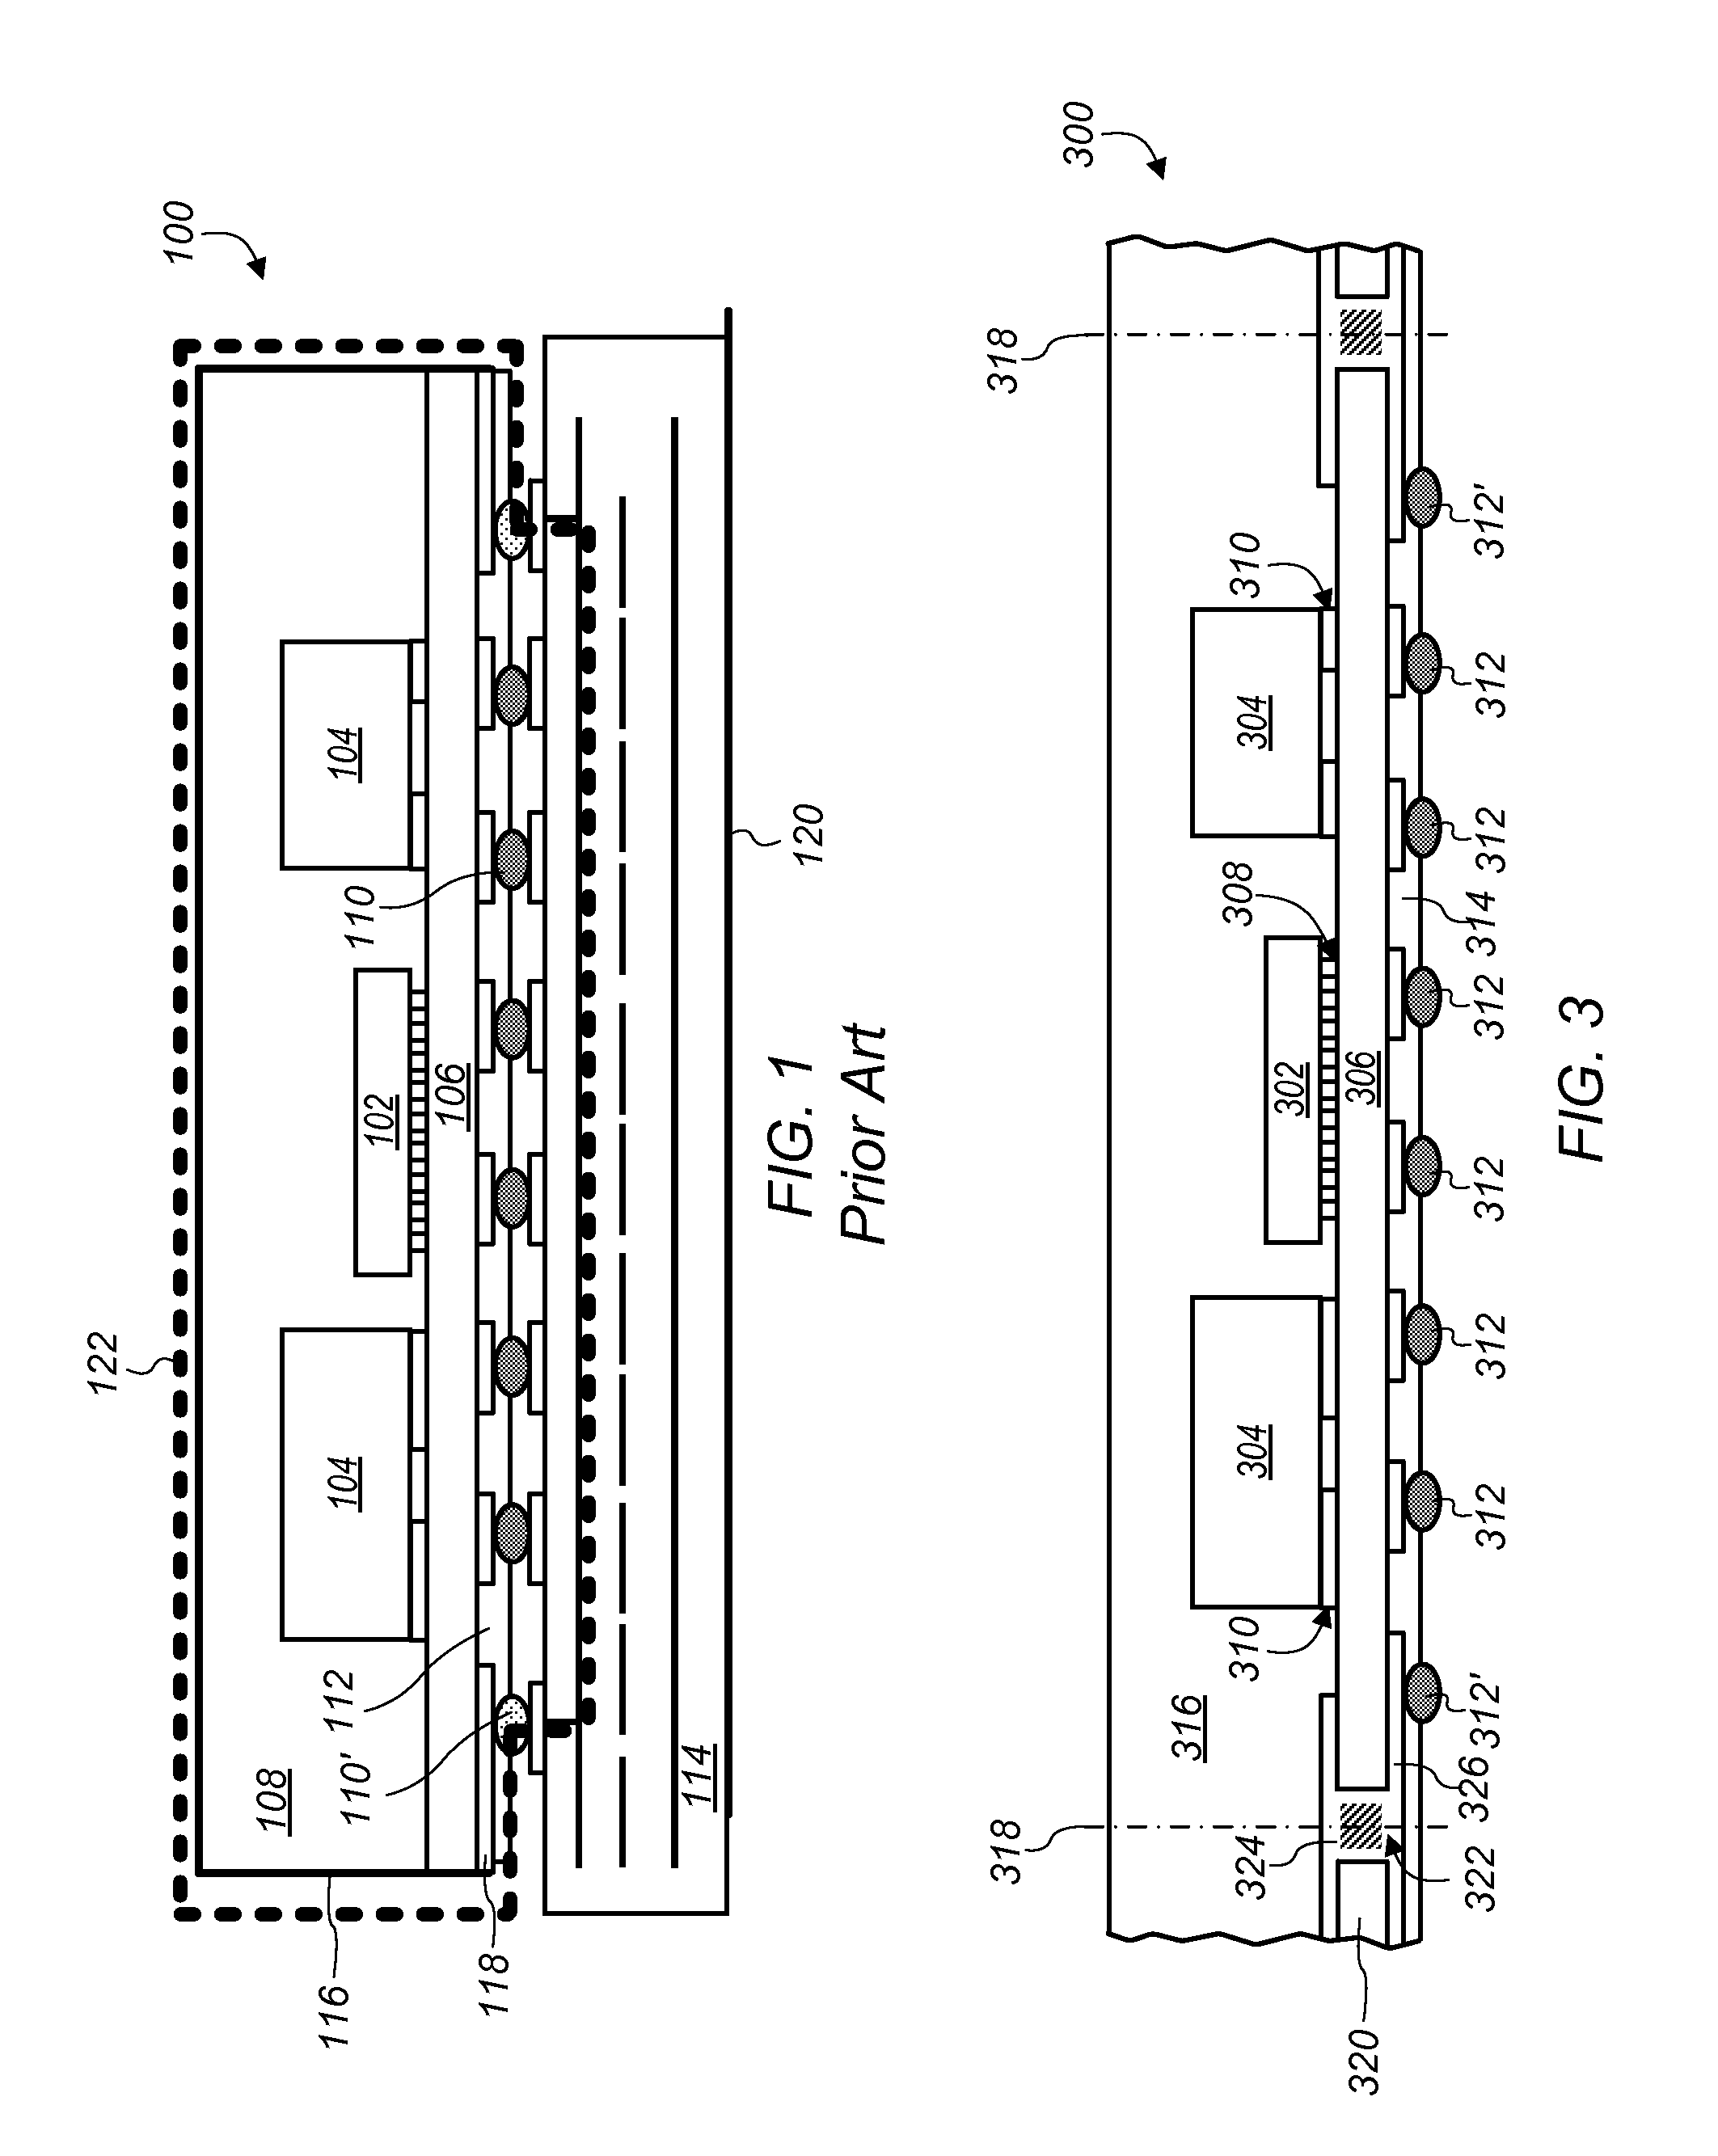 SELF SHIELDED SYSTEM IN PACKAGE (SiP) MODULES